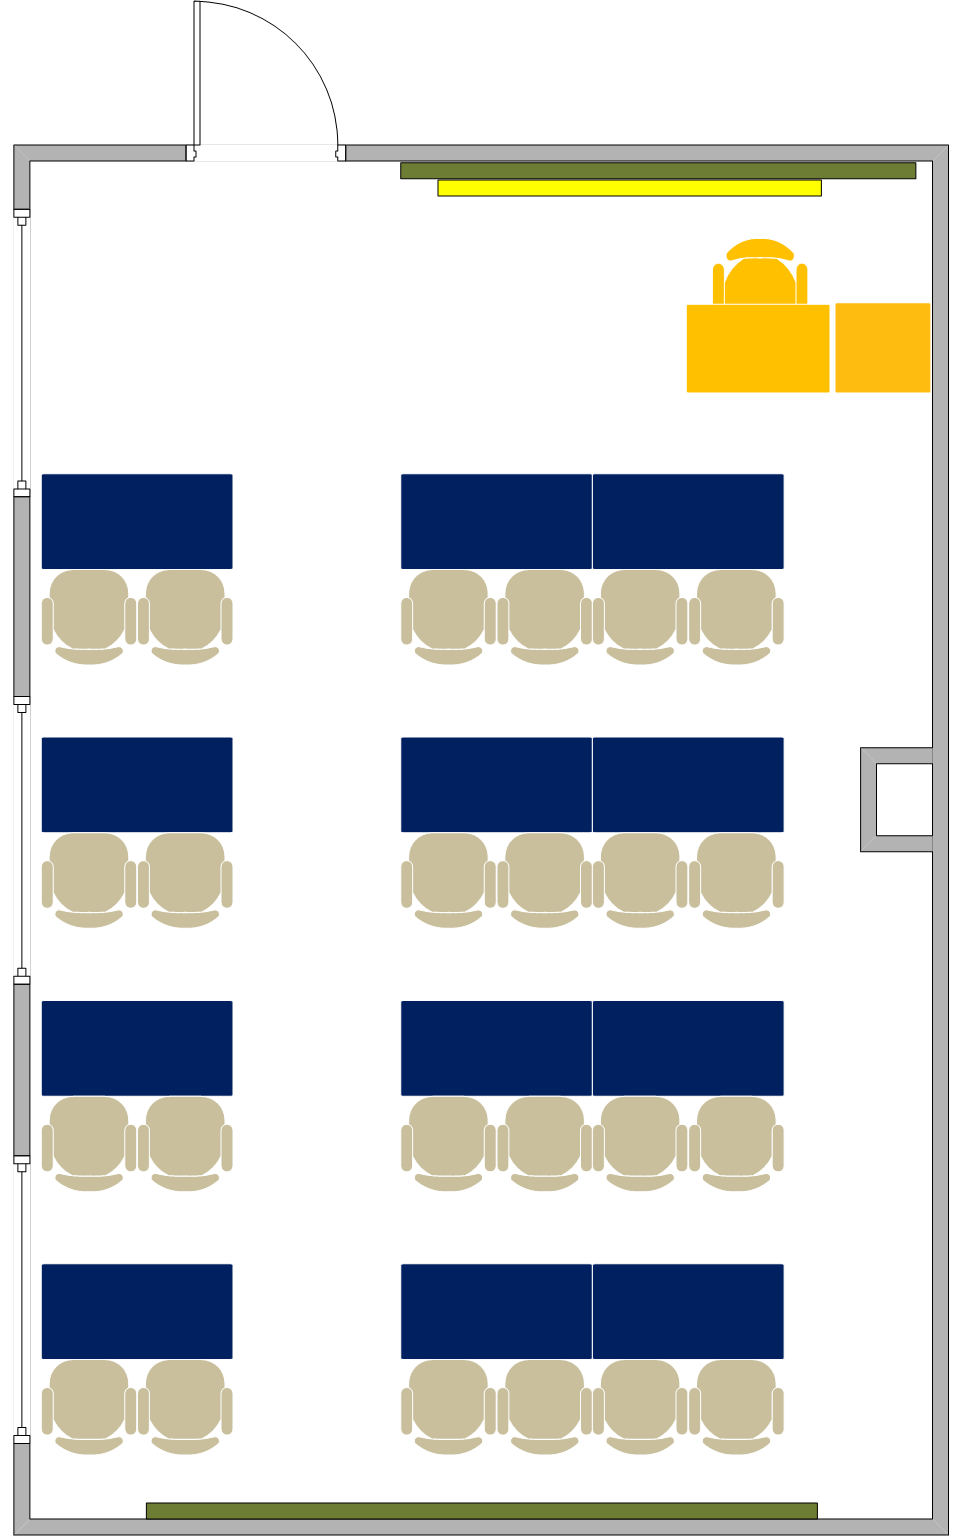 Humanities And Social Sciences Building - 4201 Seating Chart